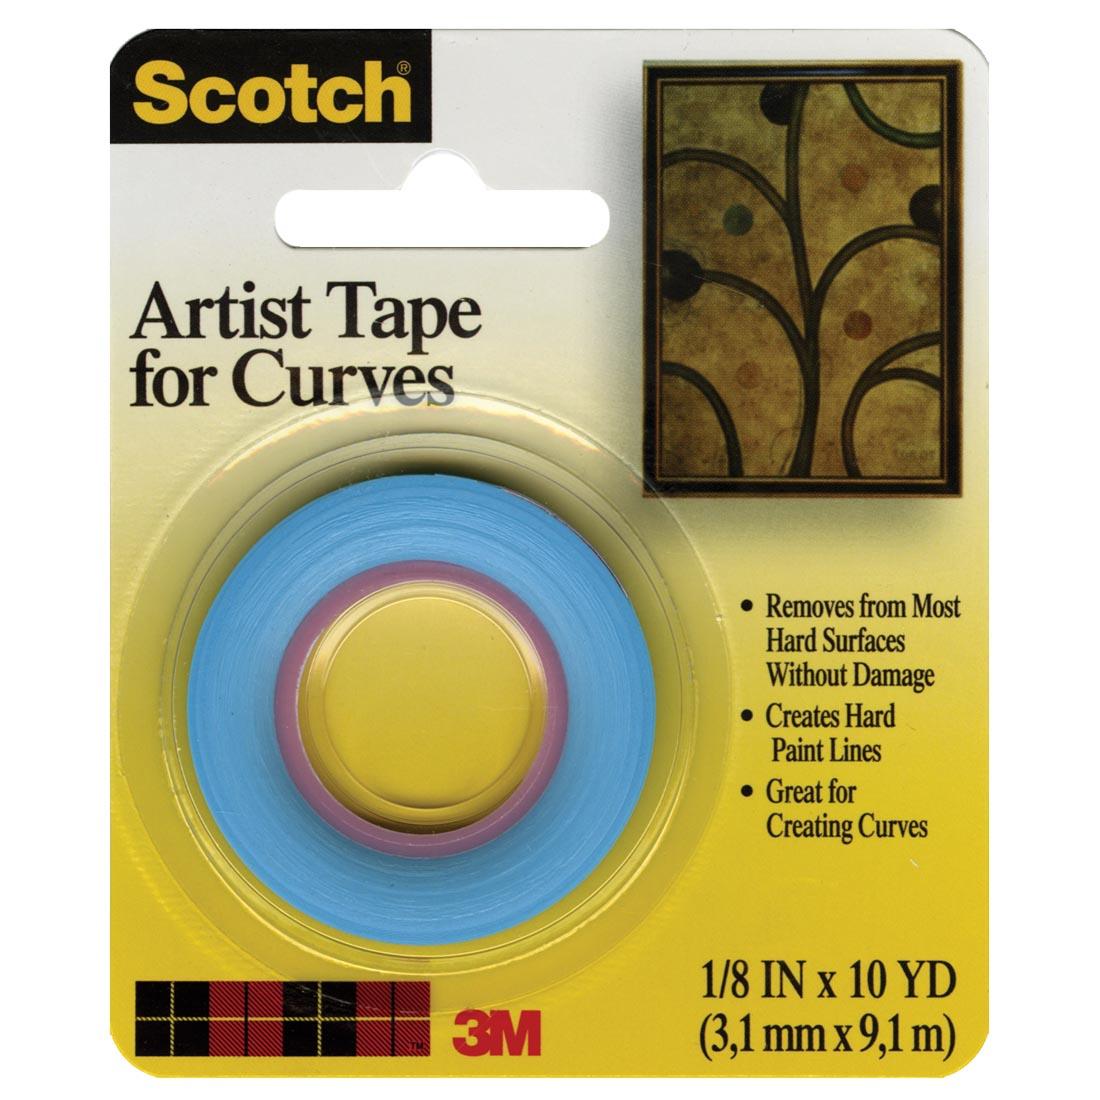 Scotch Artist Tape For Curves, 1/8" x 10 yards